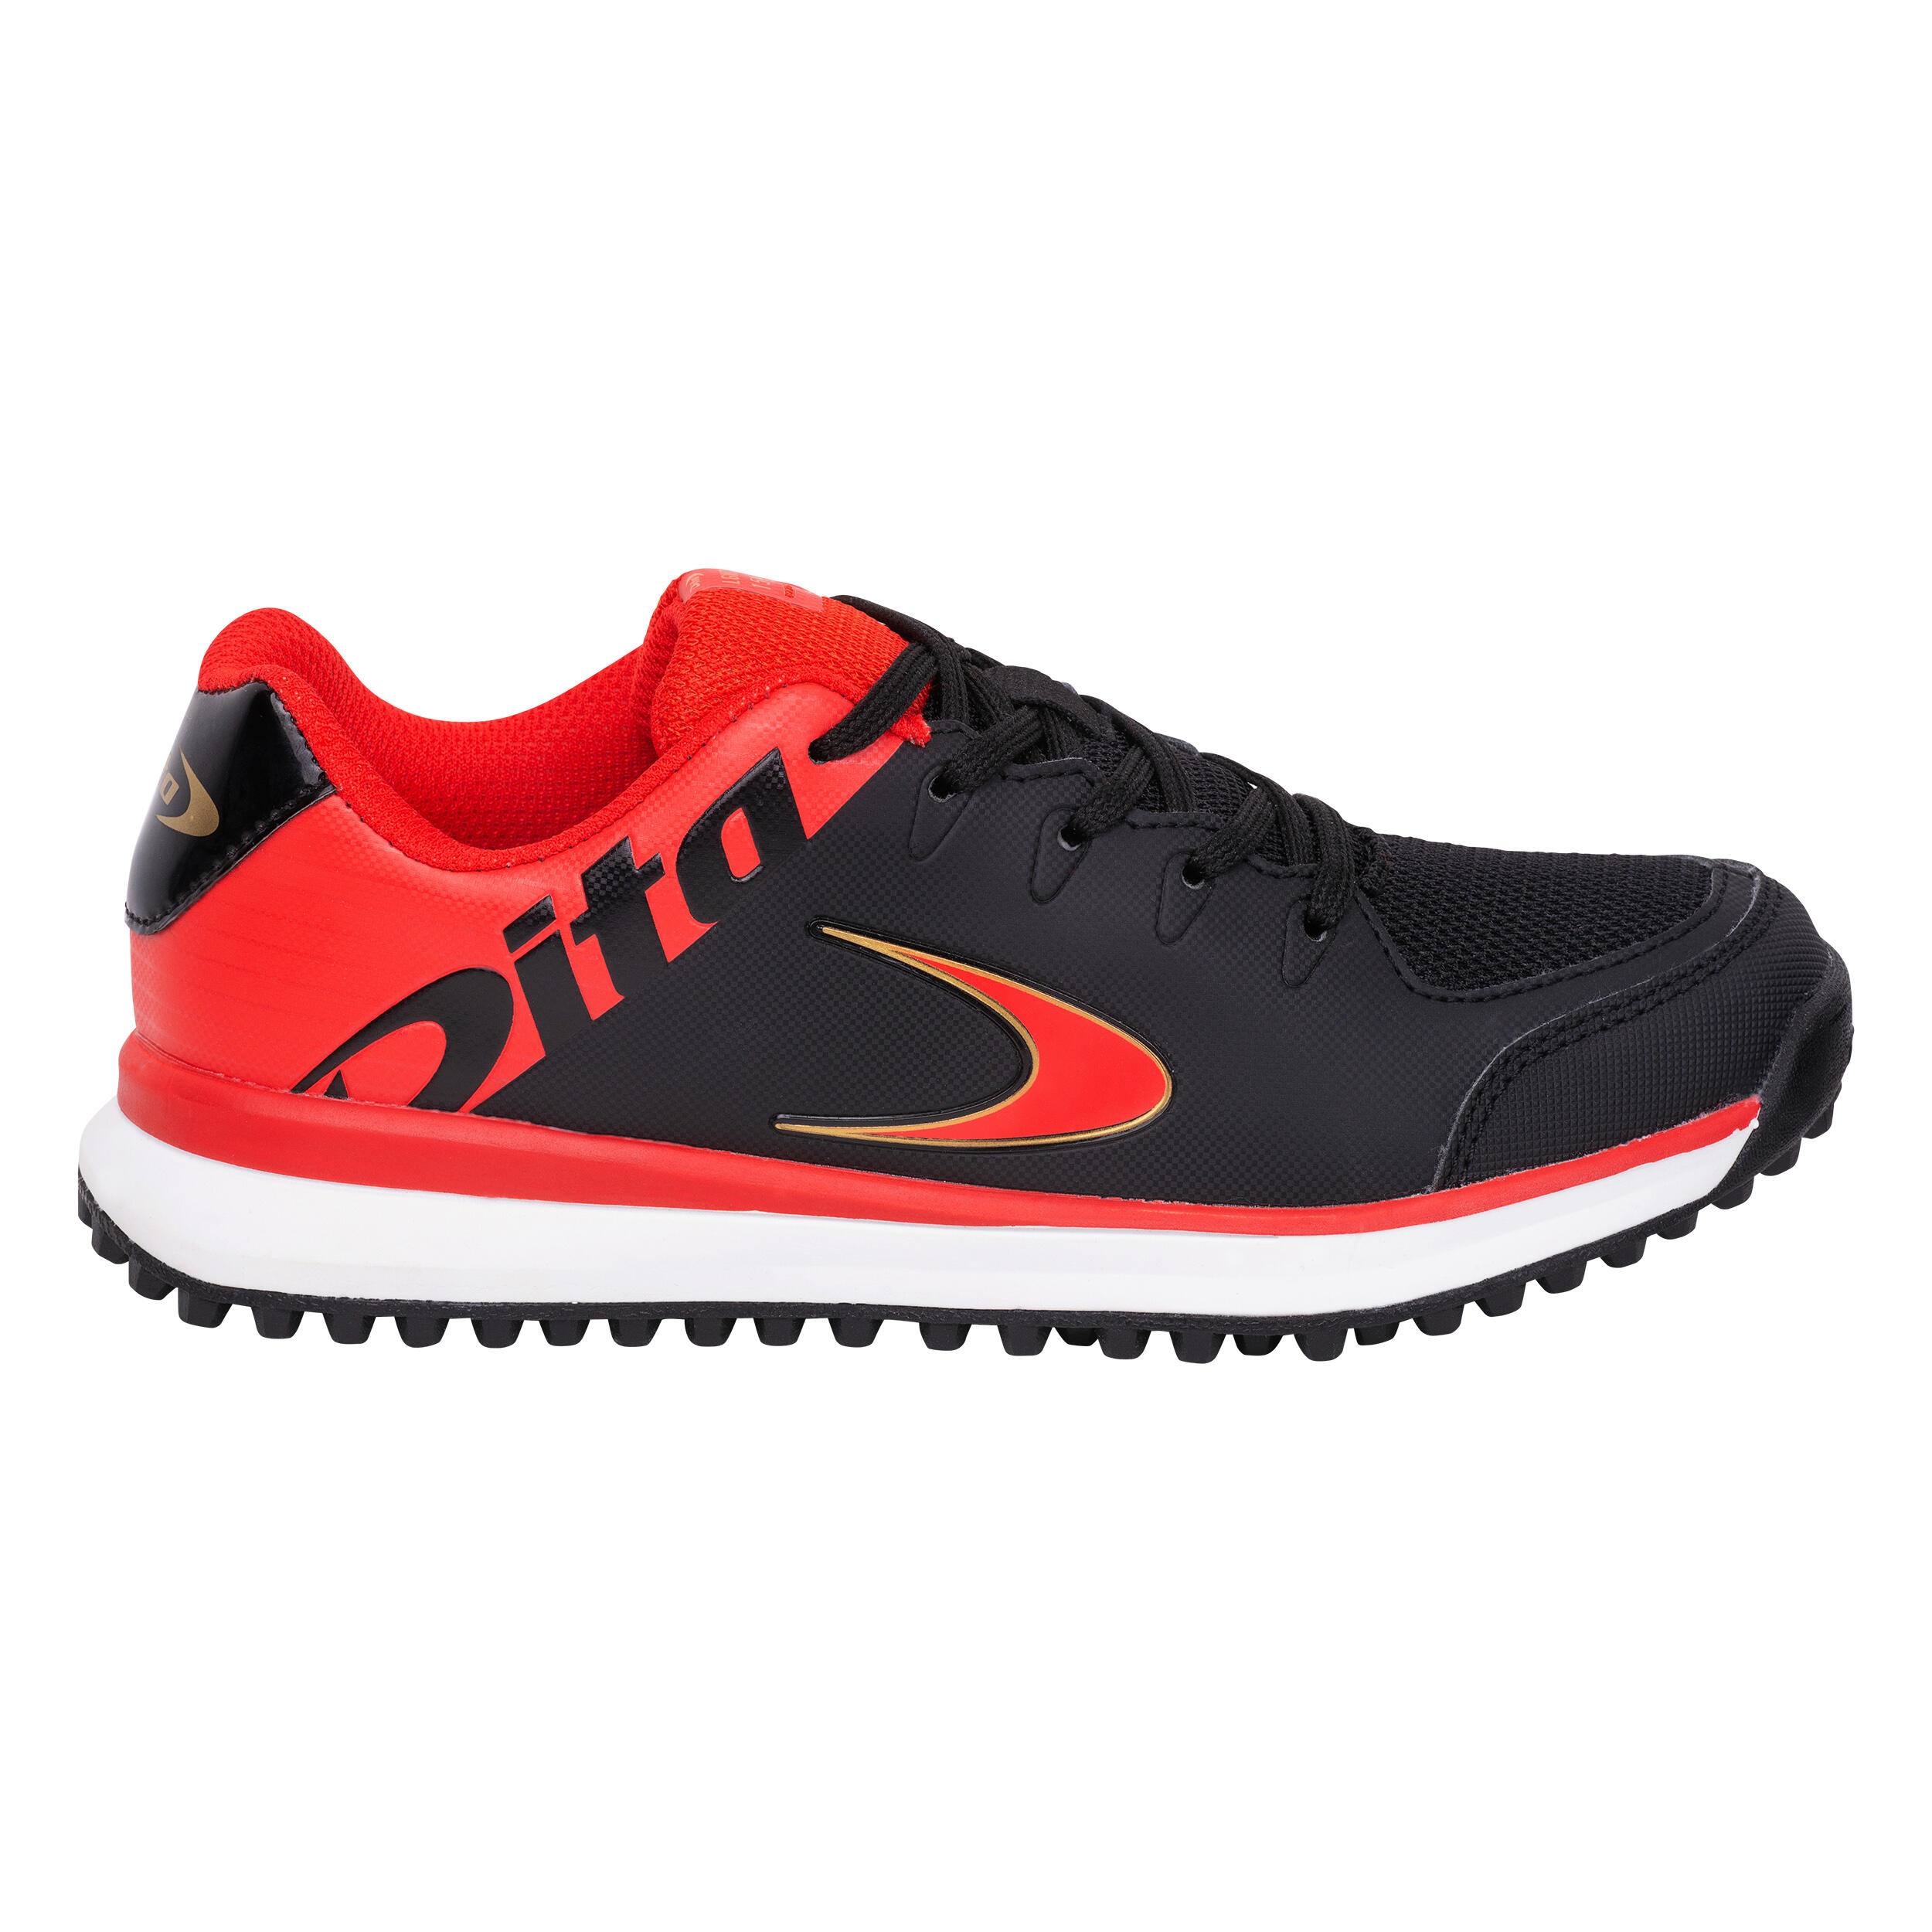 DITA Teens' Low- to Moderate-Intensity Field Hockey Shoes LGHT 150 - Red/Black